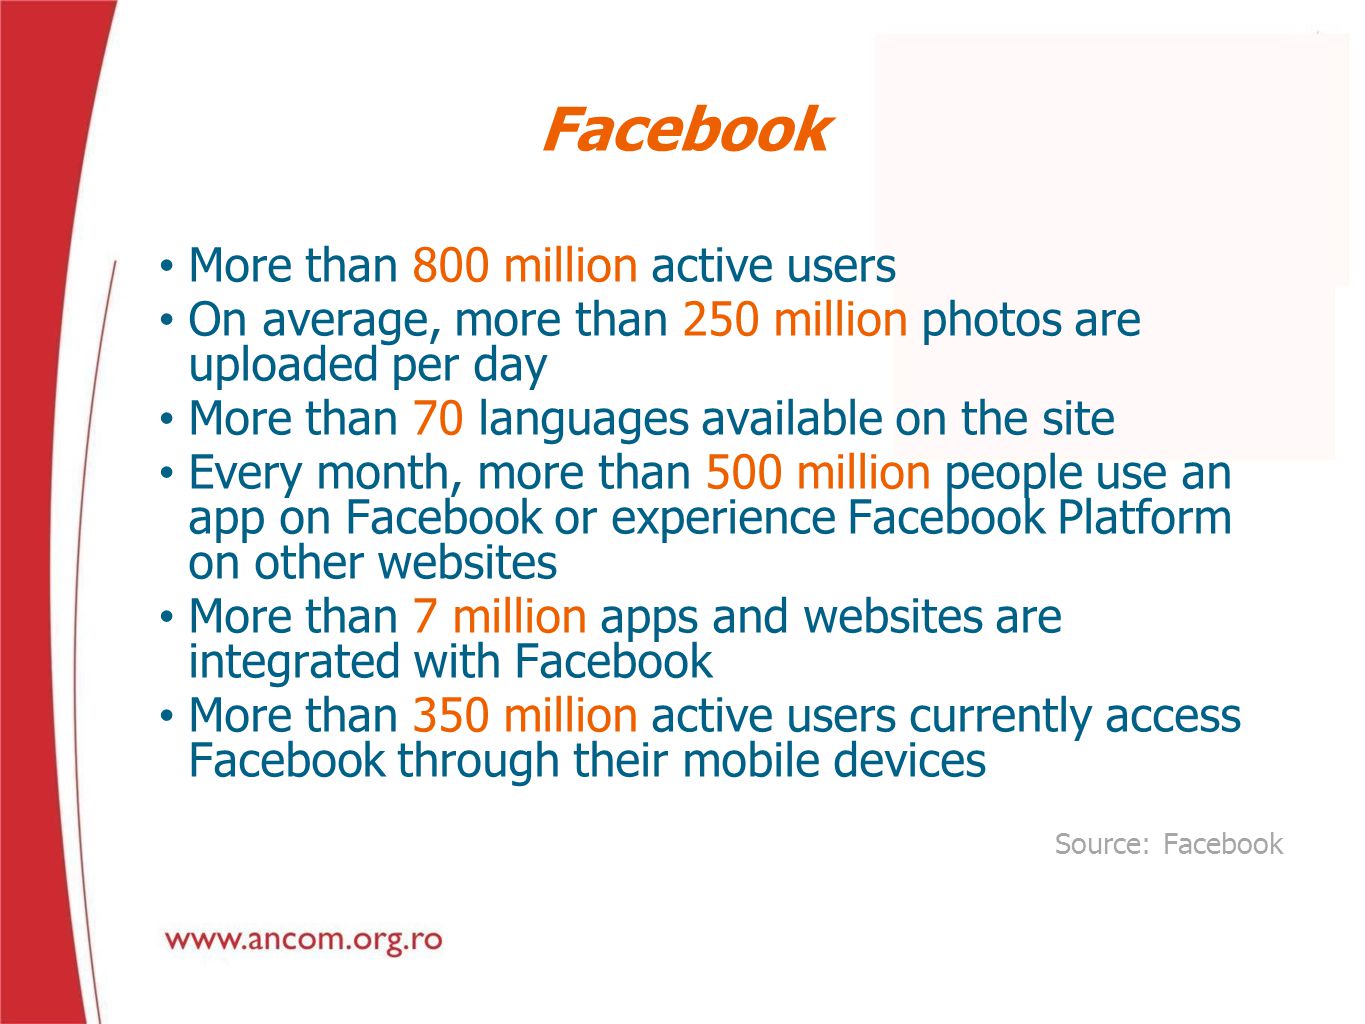 Facebook More than 800 million active users On average, more than 250 million photos are uploaded per day More than 70 languages available on the site Every month, more than 500 million people use an app on Facebook or experience Facebook Platform on other websites More than 7 million apps and websites are integrated with Facebook More than 350 million active users currently access Facebook through their mobile devices Source: Facebook